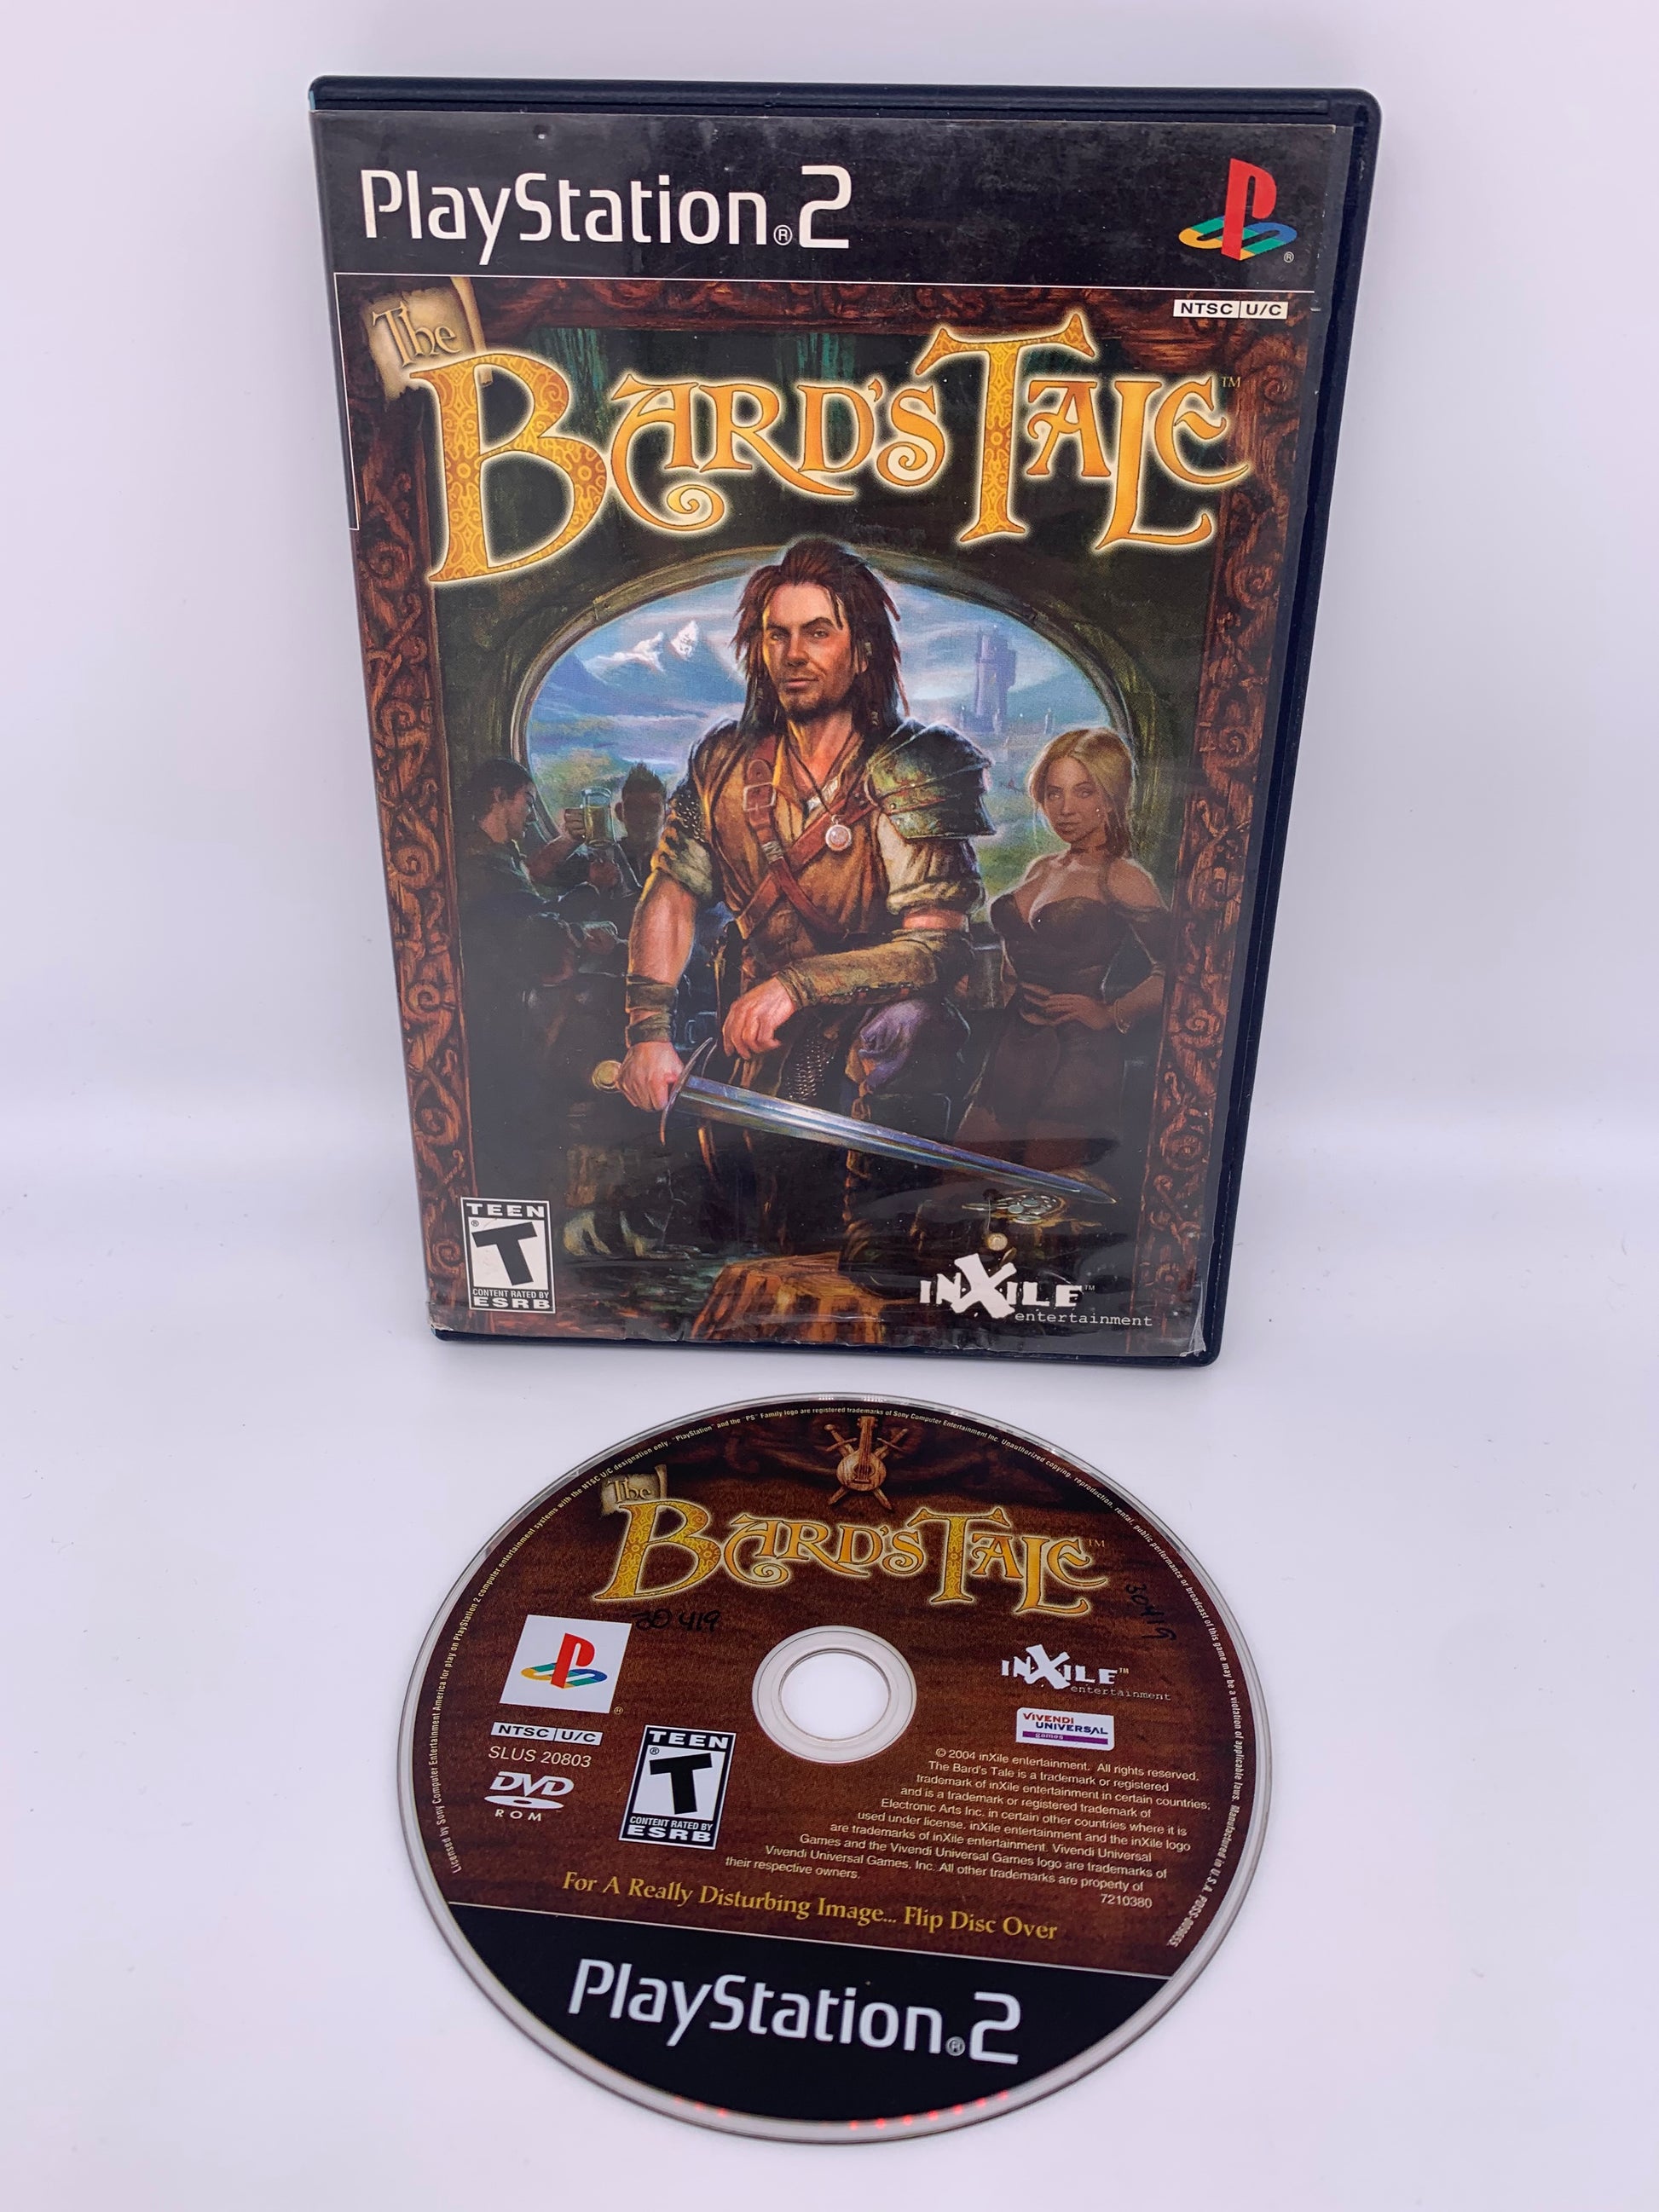 PiXEL-RETRO.COM : SONY PLAYSTATION 2 (PS2) COMPLET CIB BOX MANUAL GAME NTSC THE BARDS TALE